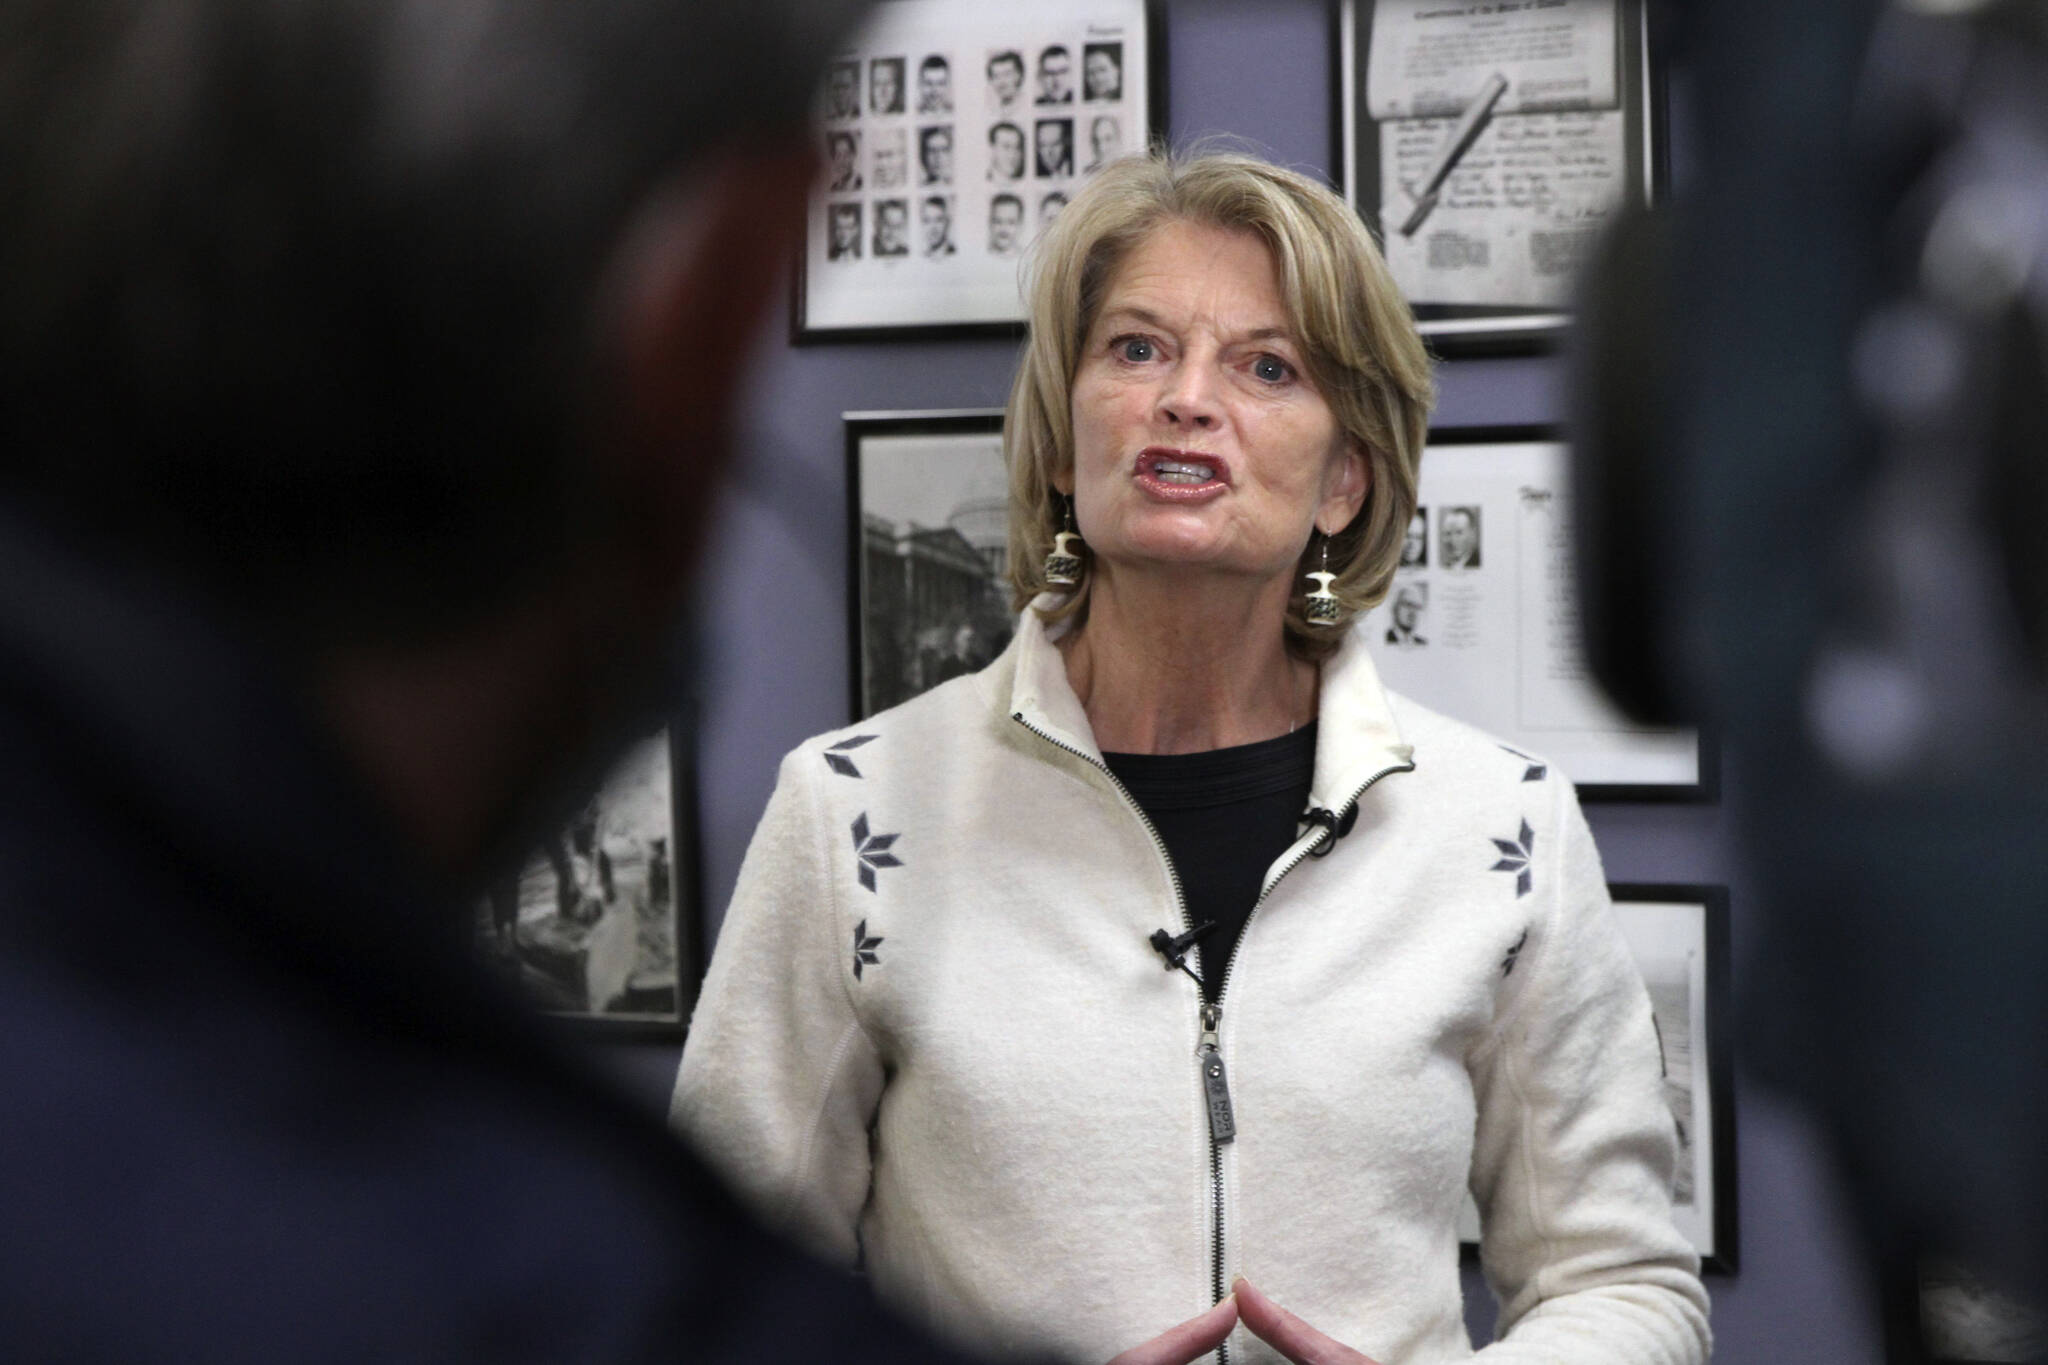 U.S. Sen. Lisa Murkowski, an Alaska Republican, speaks to reporters after filing for re-election Friday, Nov. 12, 2021, at the Division of Elections office in Anchorage, Alaska, setting up a race against a primary challenger endorsed by former President Donald Trump. (AP Photo/Mark Thiessen)